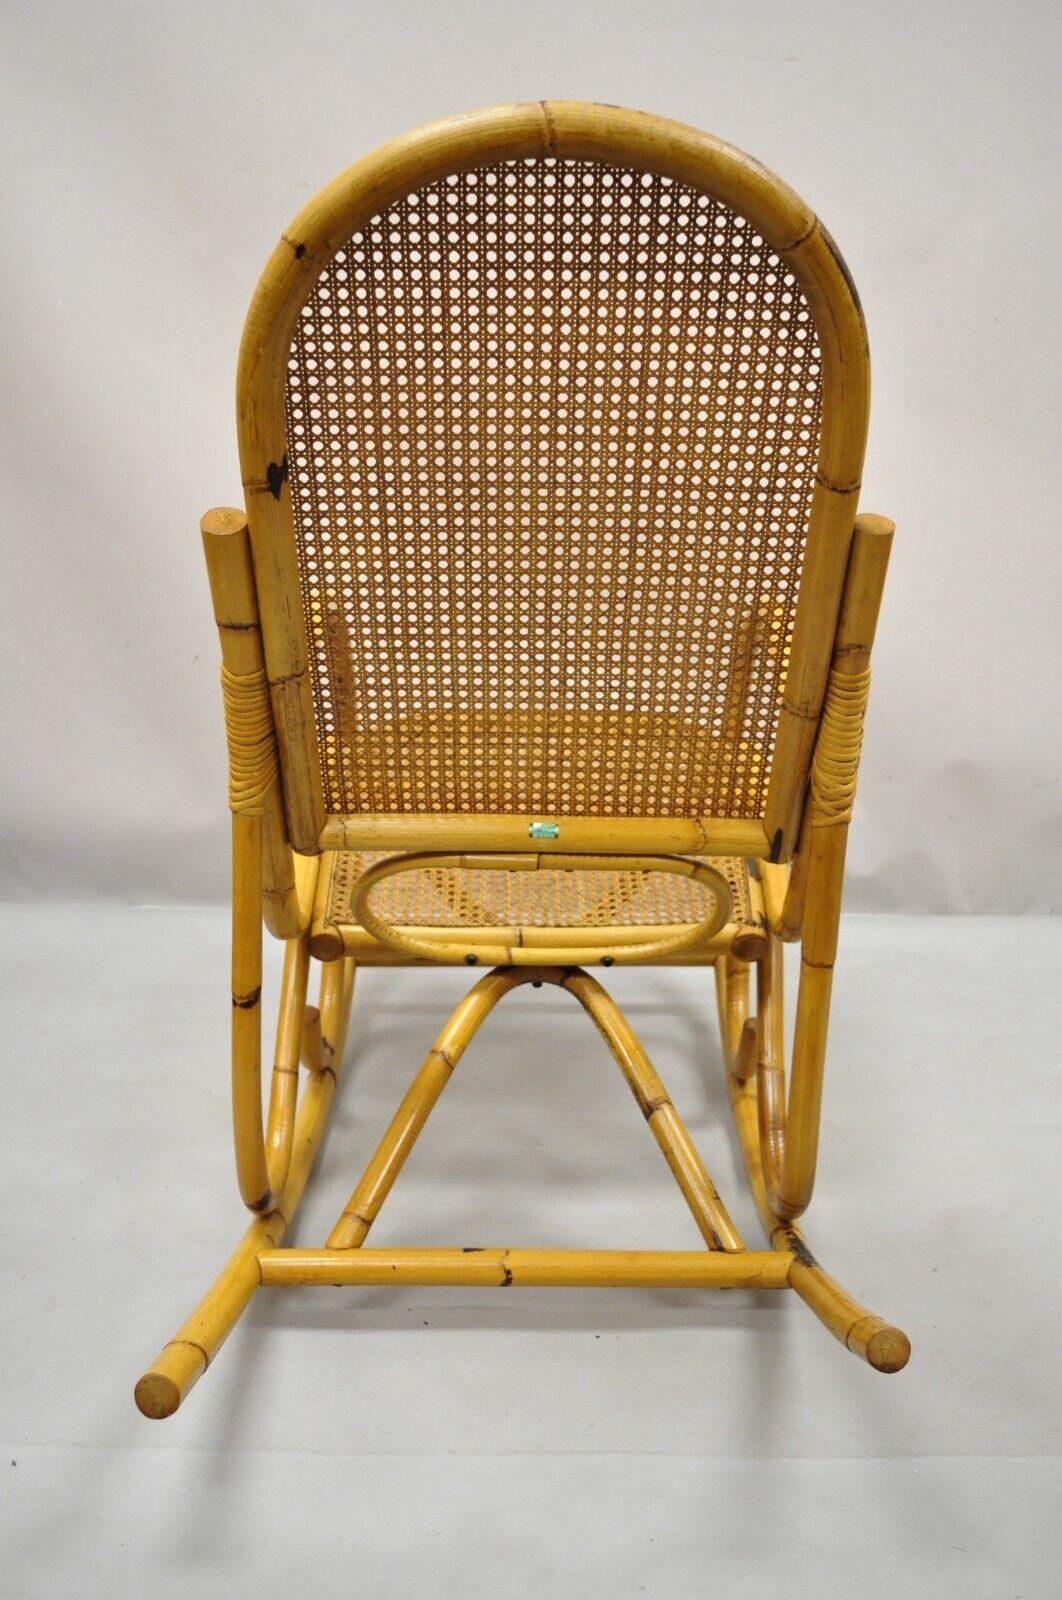 Vintage Thonet Bentwood and Rattan Cane Rocker Rocking Chair by Cerda 2